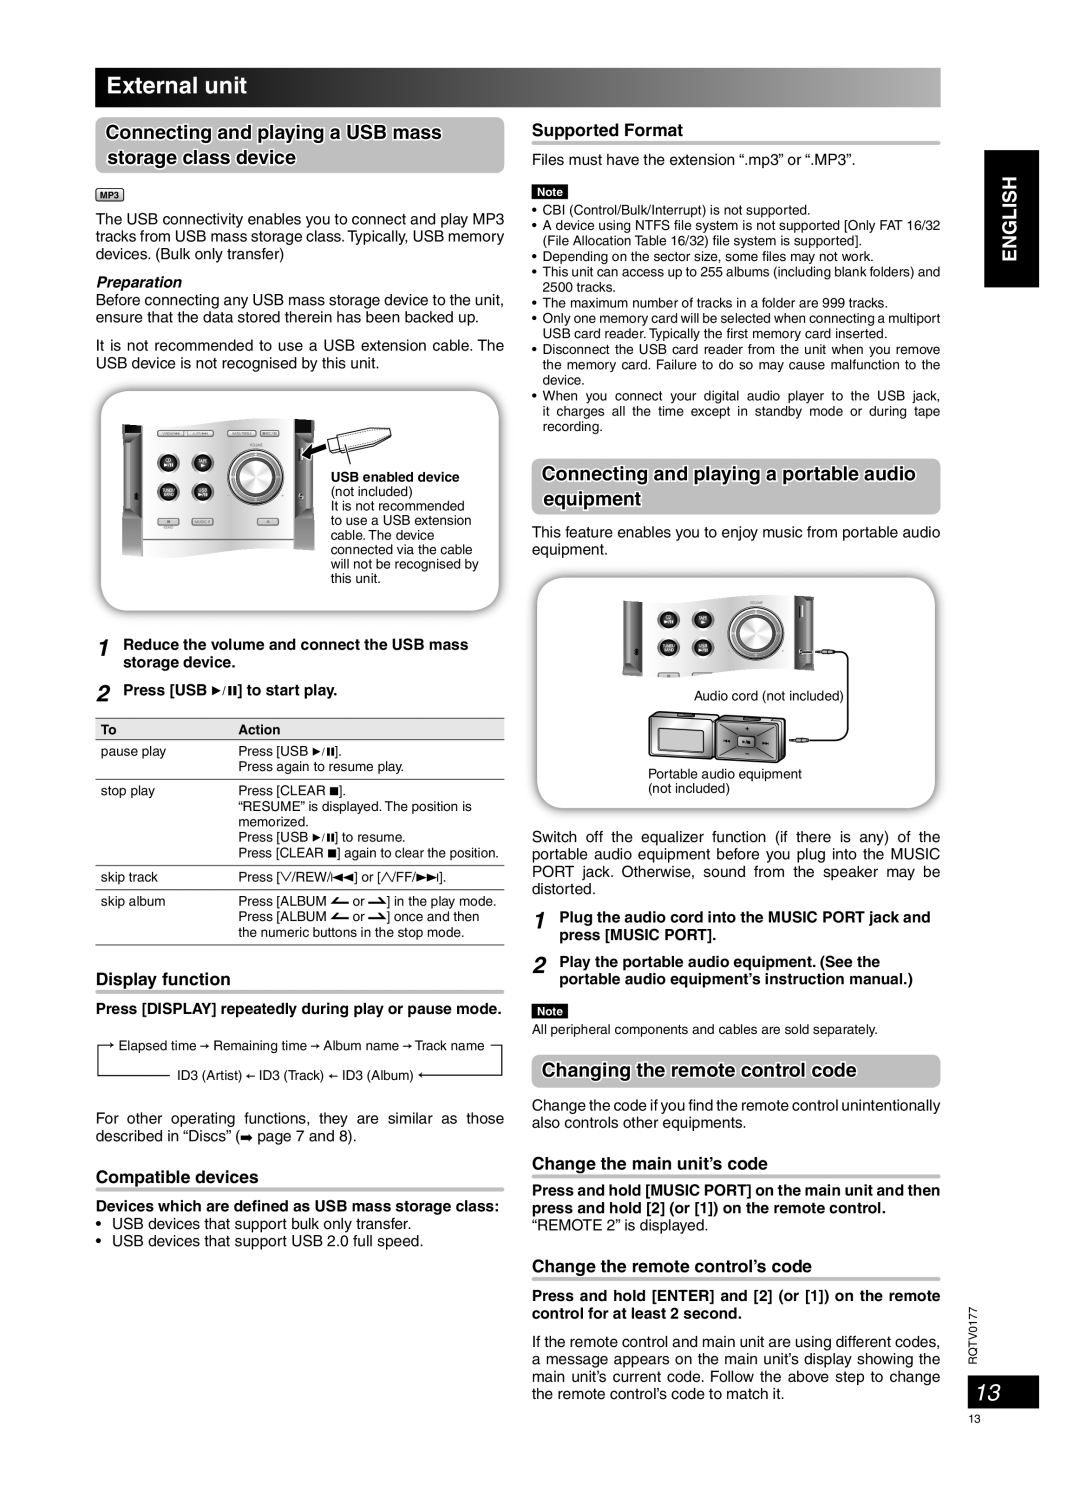 Panasonic SC-PM45 manual External unit, Connecting and playing a portable audio equipment, Changing the remote control code 